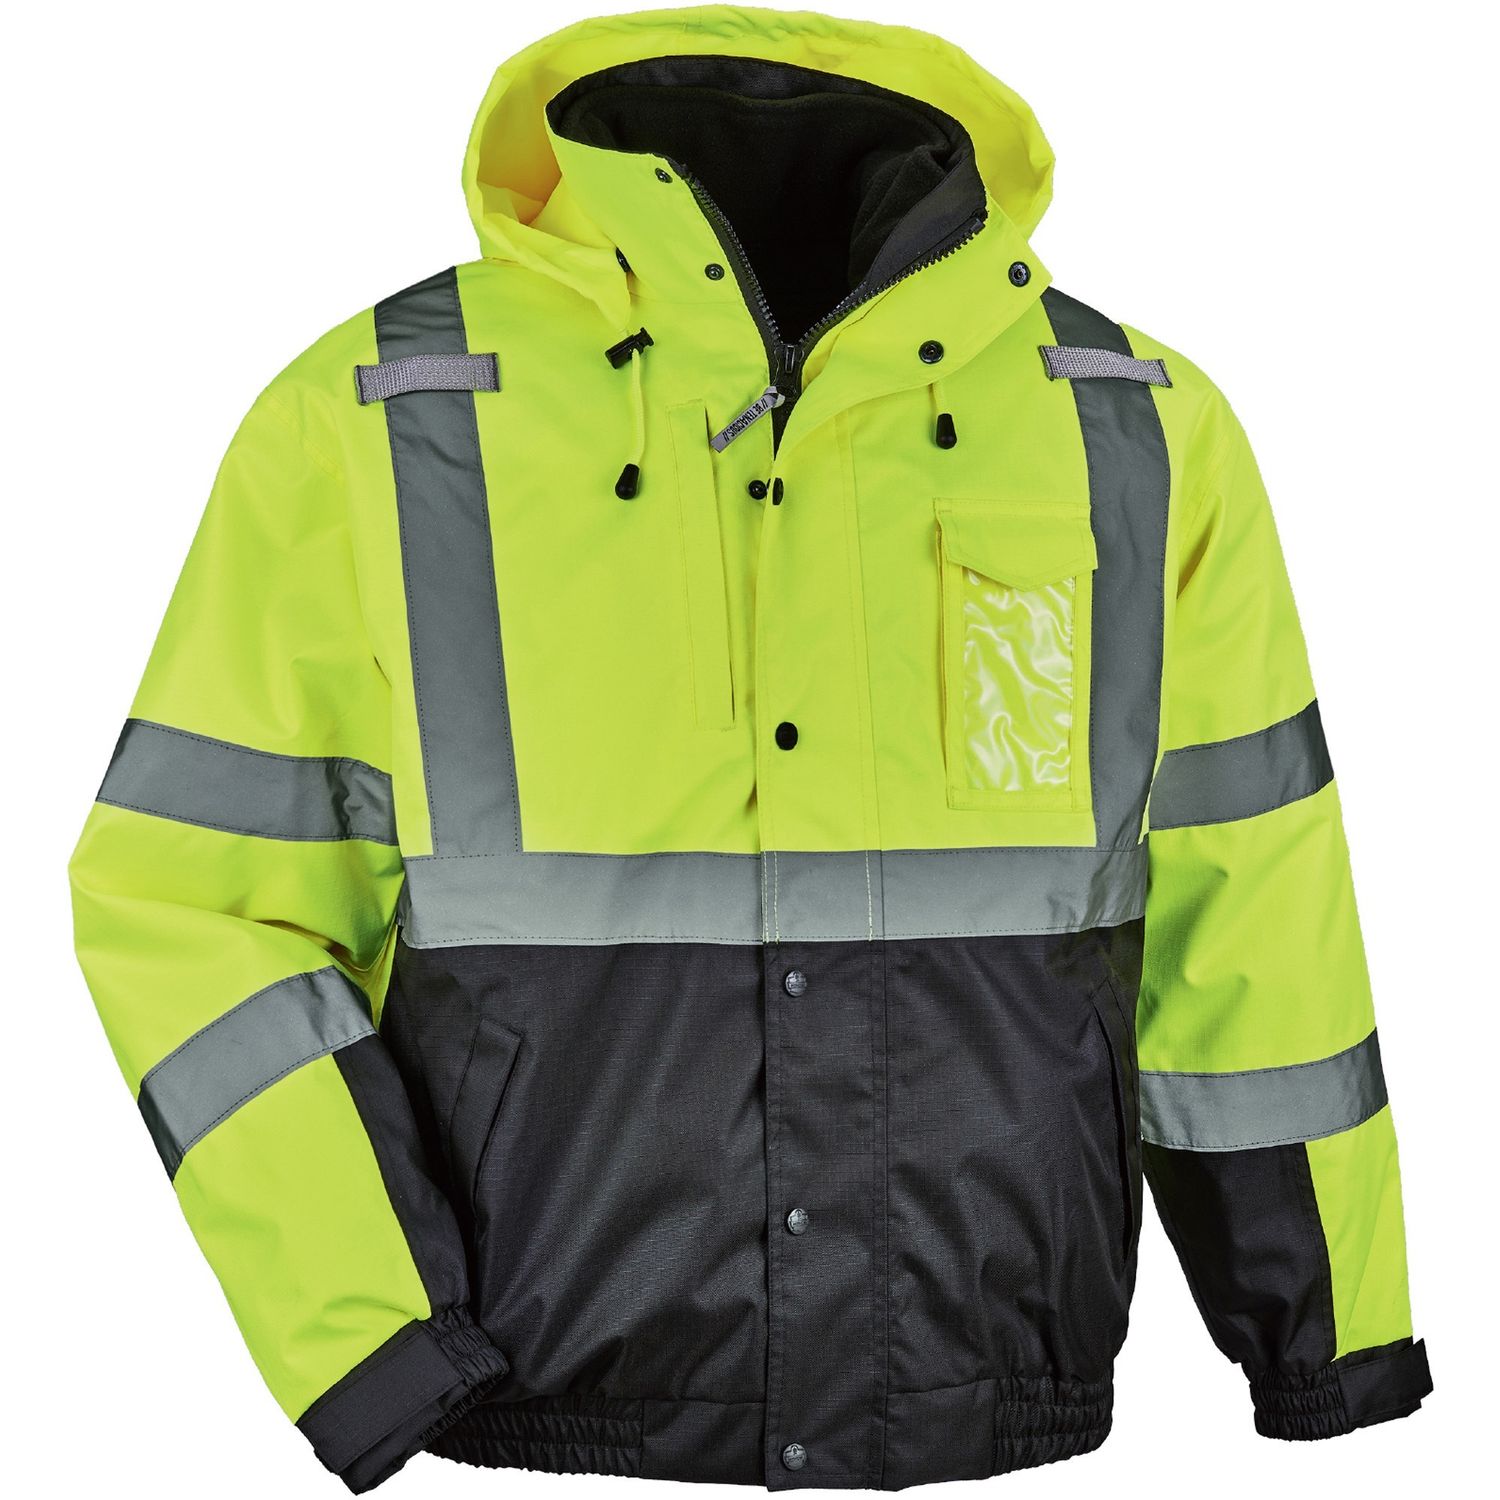 8381 Hi-Vis 4-in-1 Bomber Jacket Type R Class 3 Recommended for: Accessories, Baggage Handling, Cell Phone, Transportation, Snowmobiling, Hiking